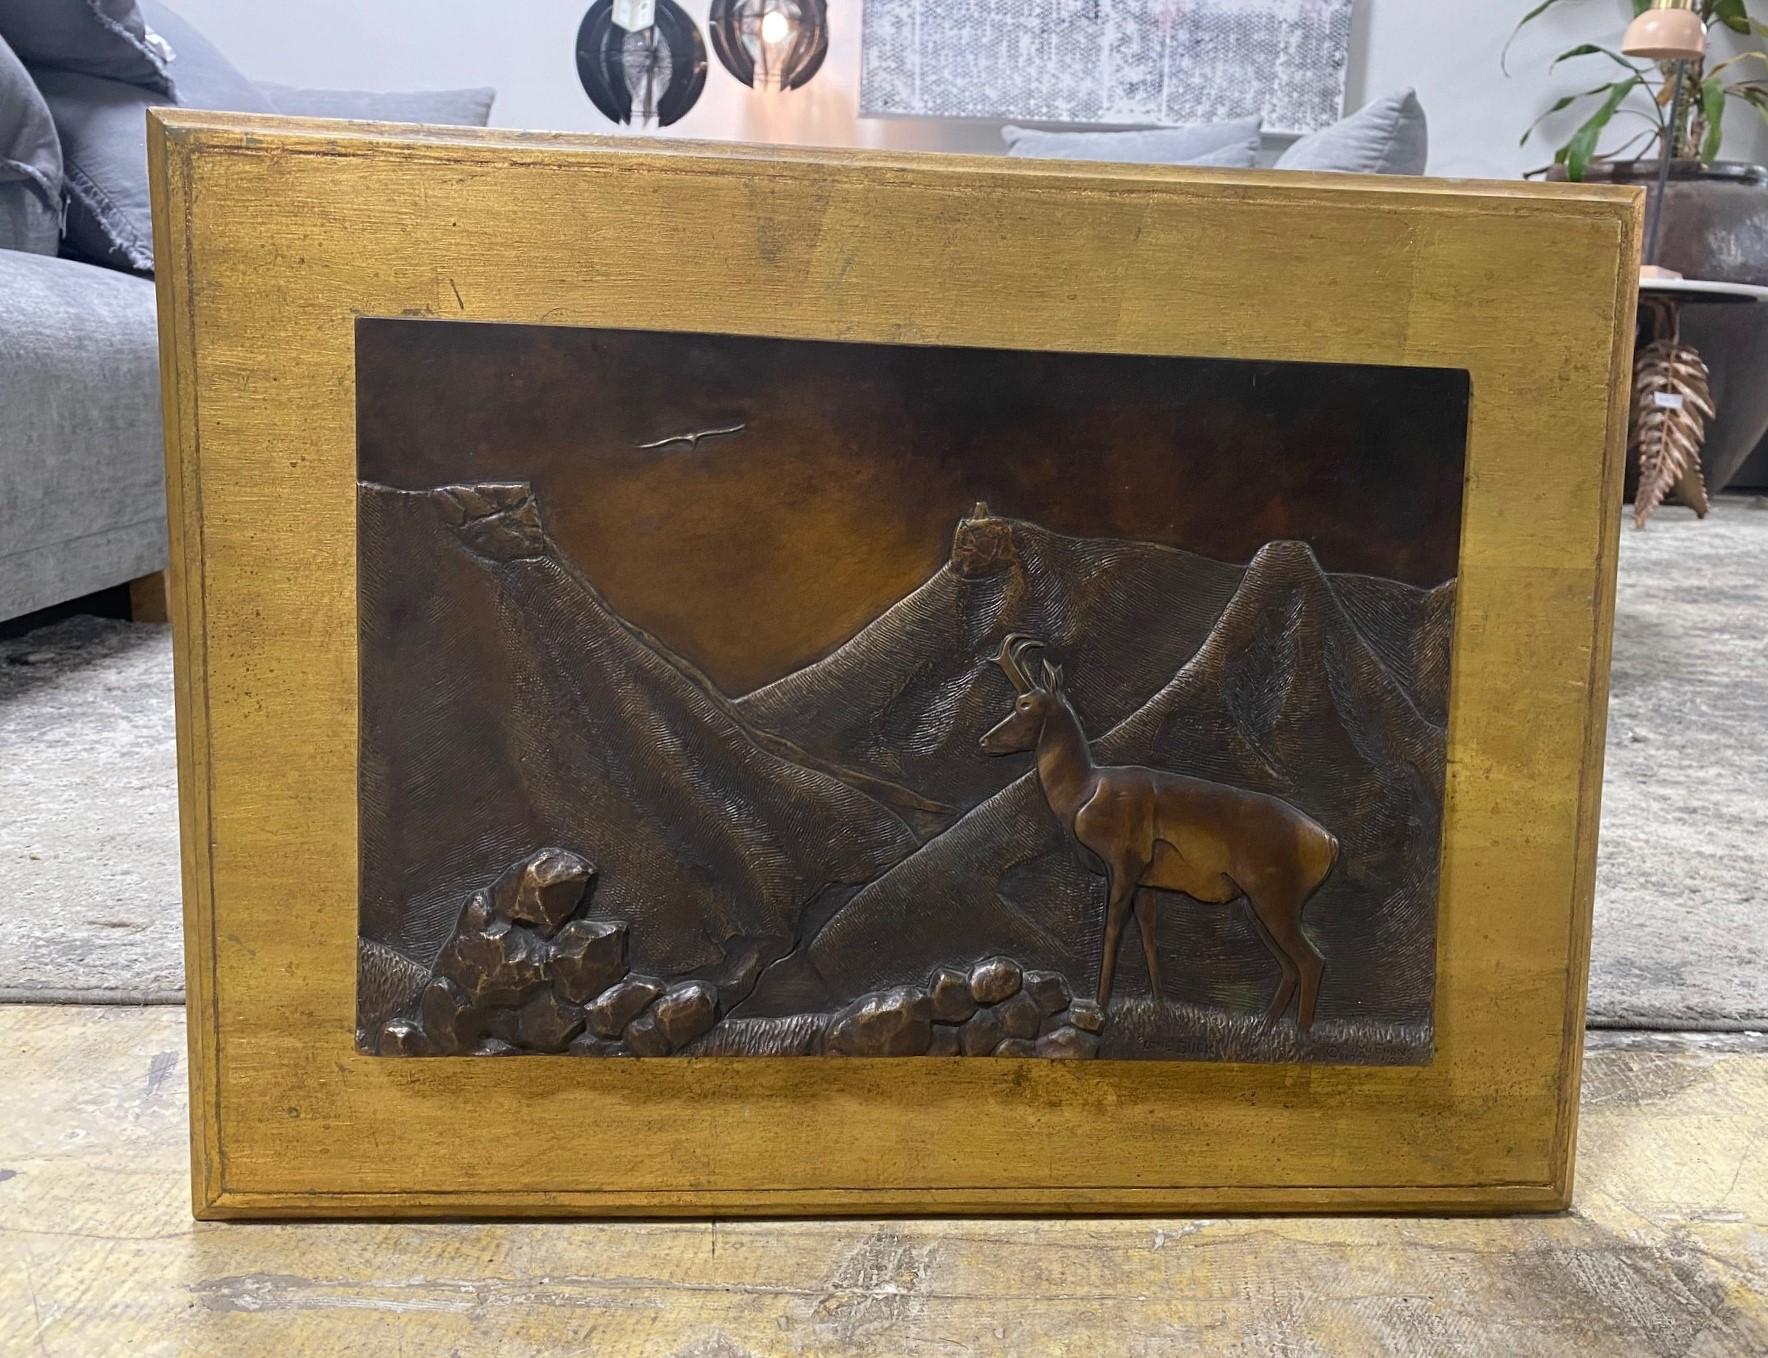 R M Evans Signed Limited Edition Bronze Wall Relief Plaque Sculpture Lone Buck For Sale 2